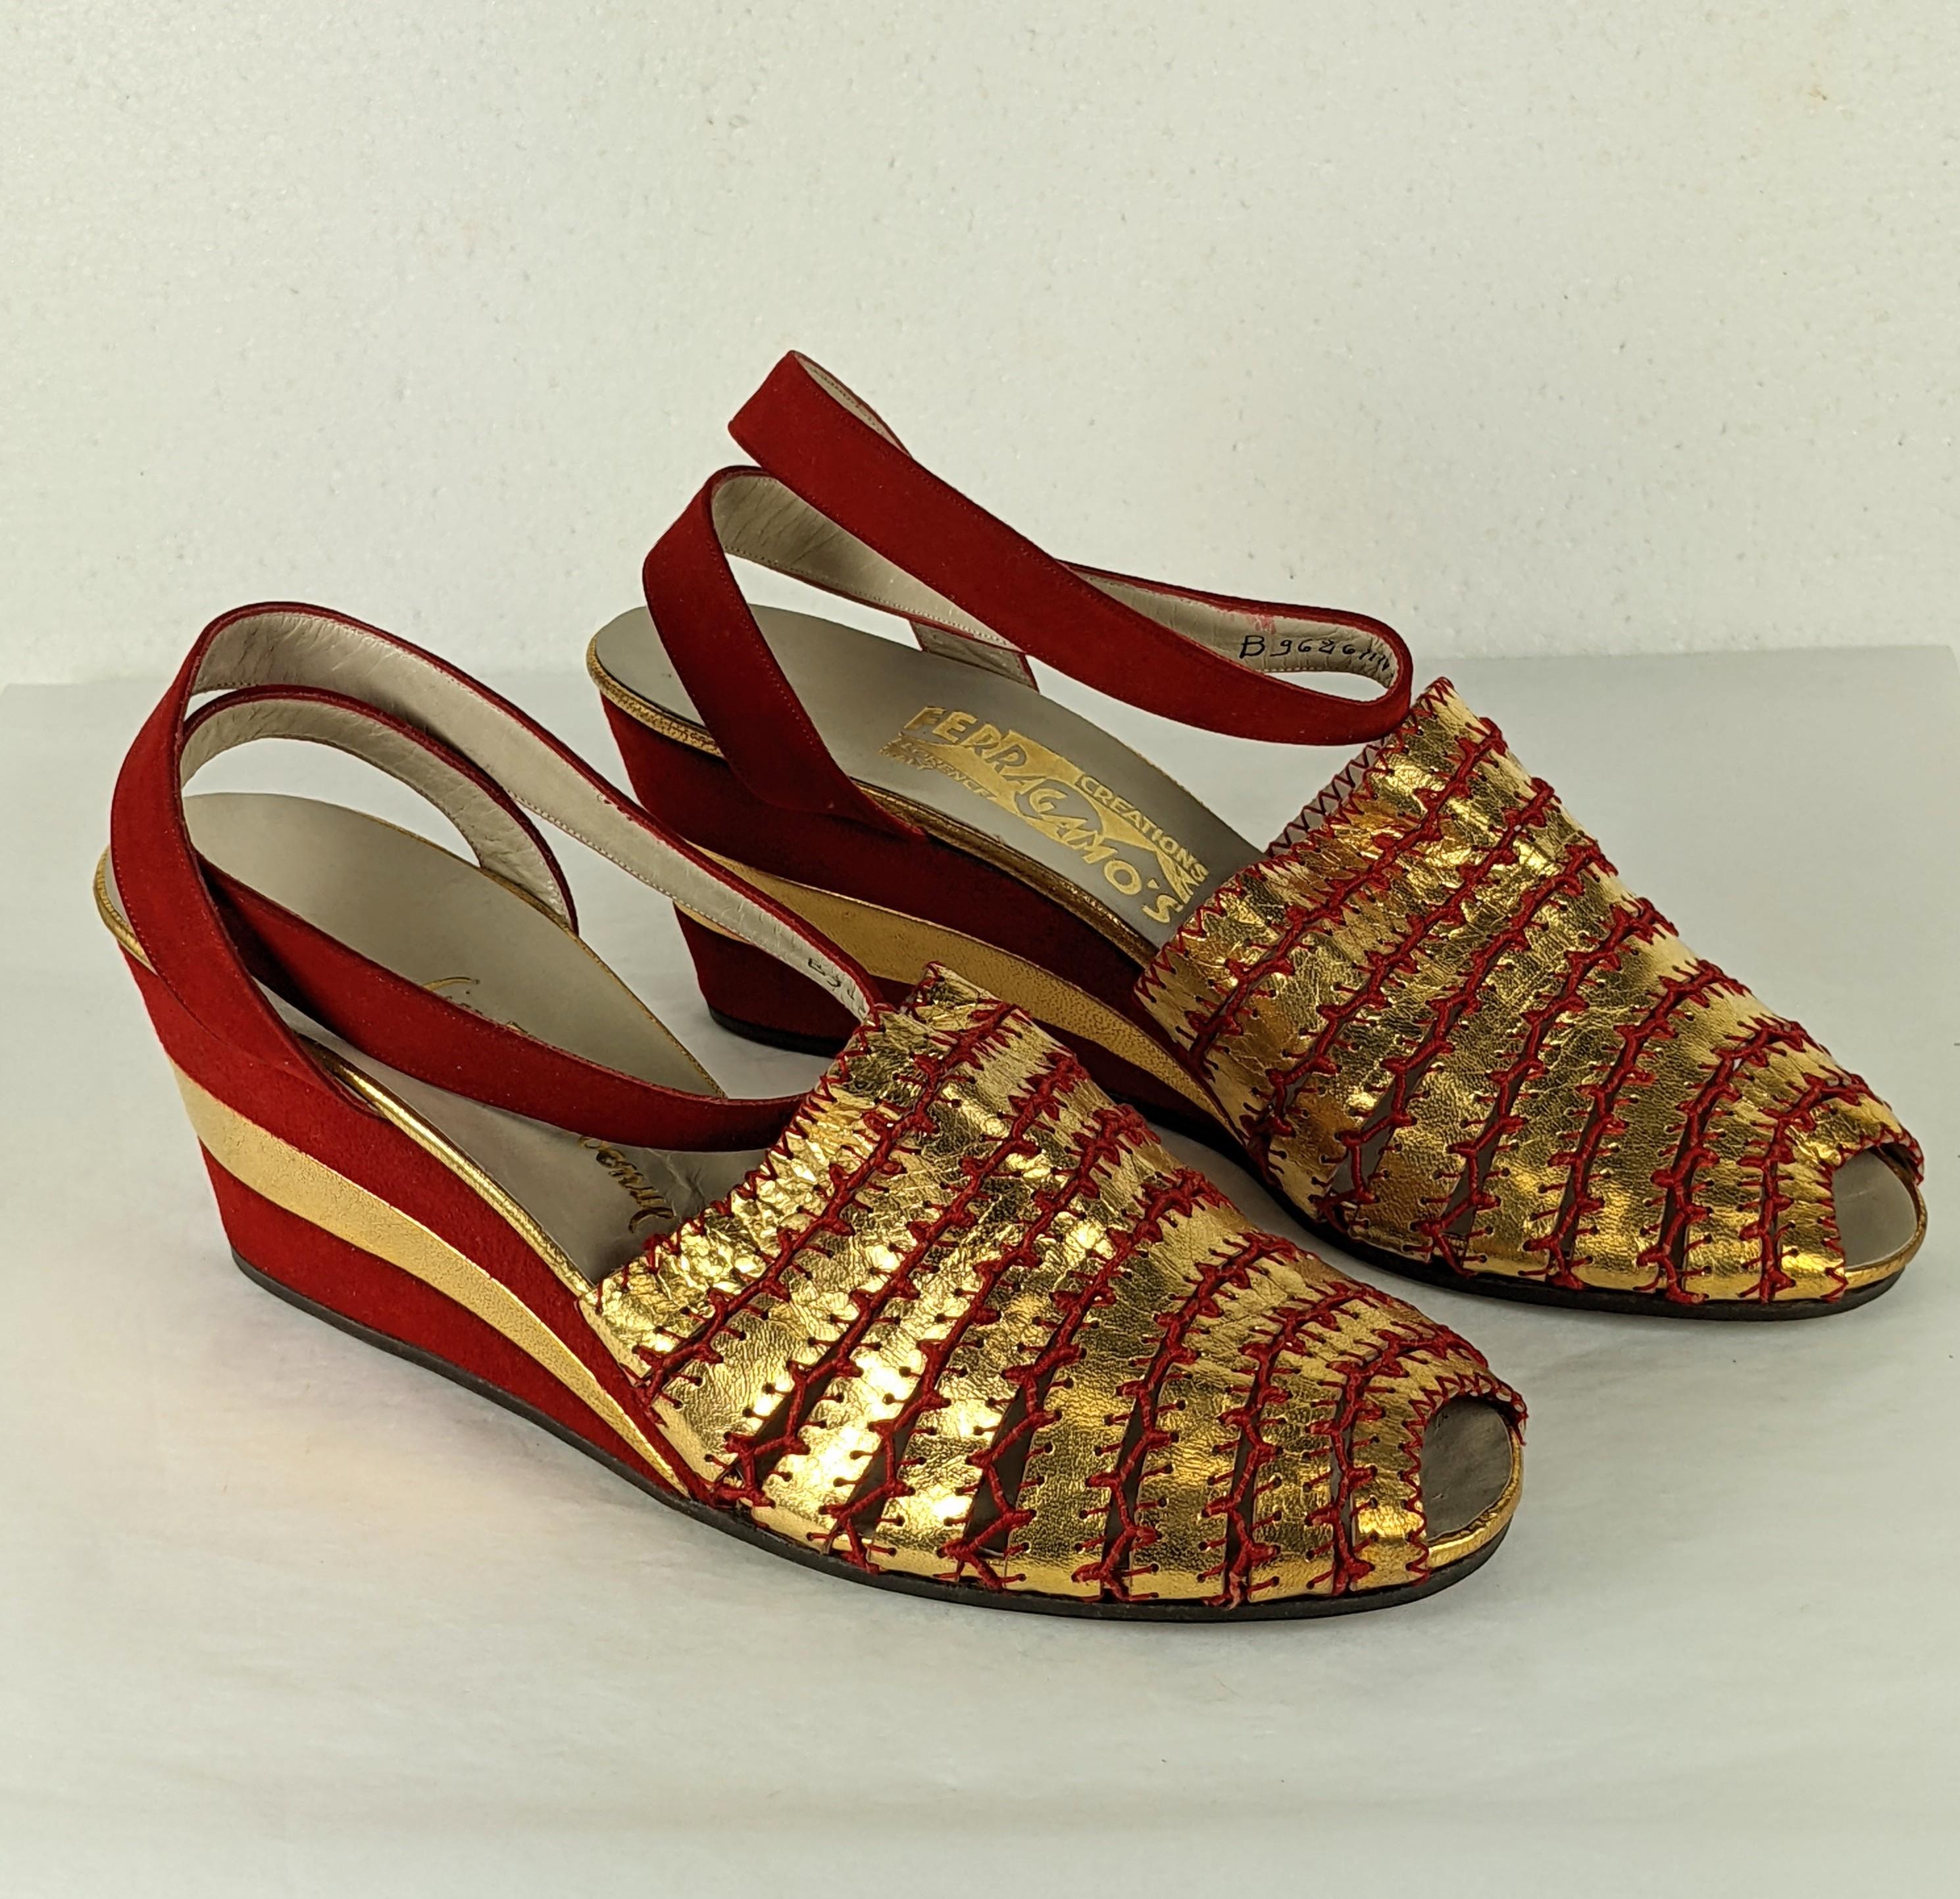 Art Deco Ferragamo Gold Kid and Red Suede Wedges, rare unworn old stock. Strips of gold kid incredibly hand stitched and hand crochet with red cotton cord, the wedges covered with red suede spliced with gold kid. 1930's Italy. 
Original sale price